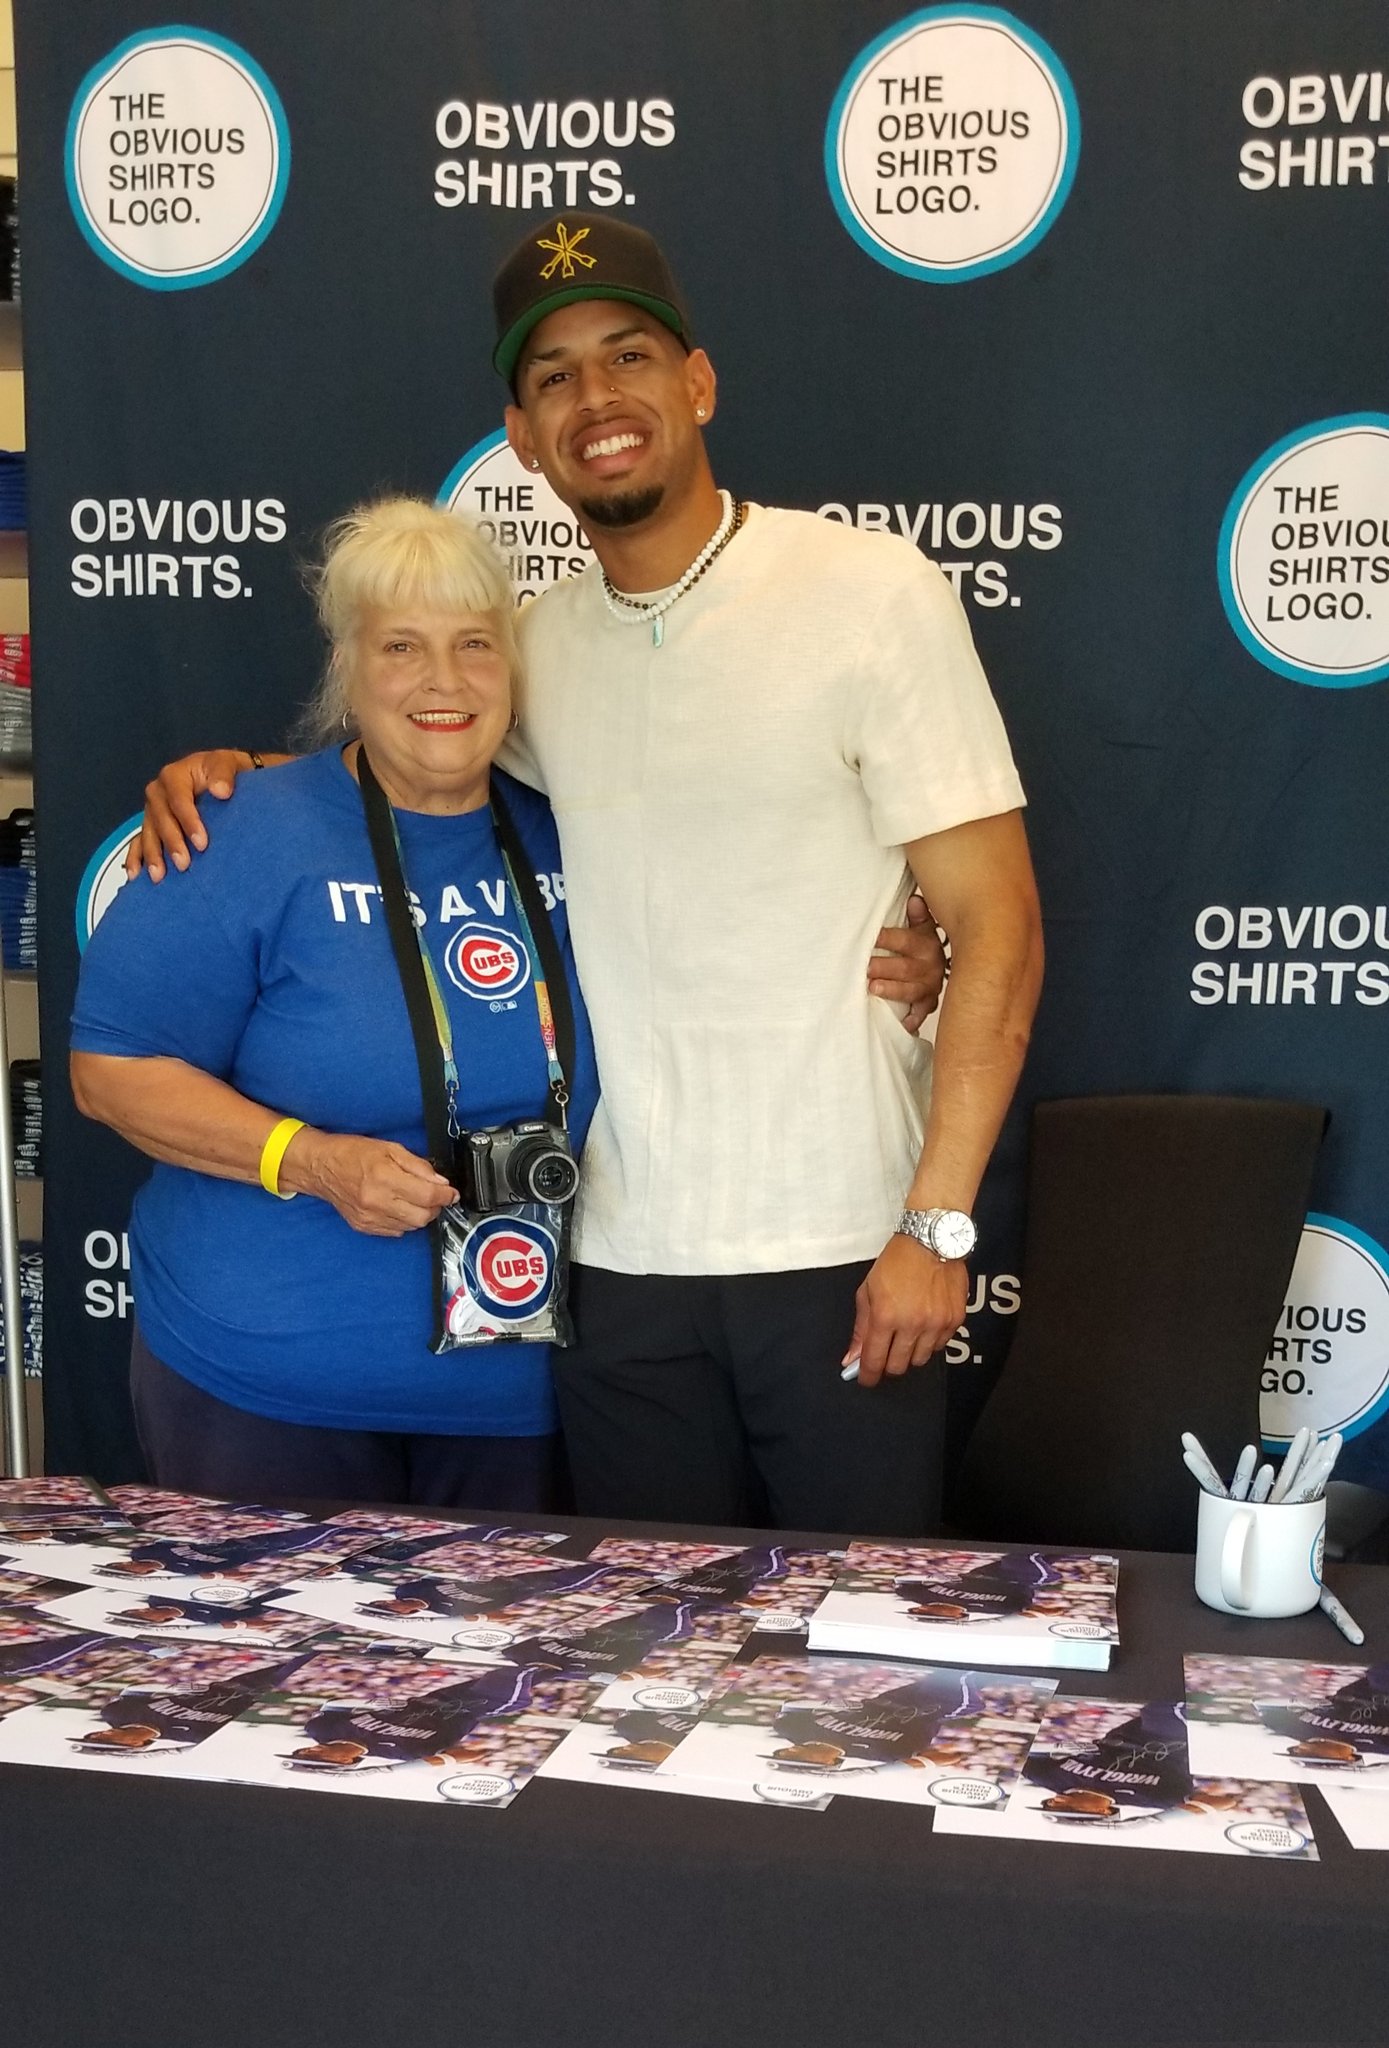 Sam Bernero on X: Pic with Christopher Morel today at a great Meet and  Greet and signing at @obvious_shirts Thanks so much Christopher and Obvious  Shirts. #cubs #obviousshirts  / X